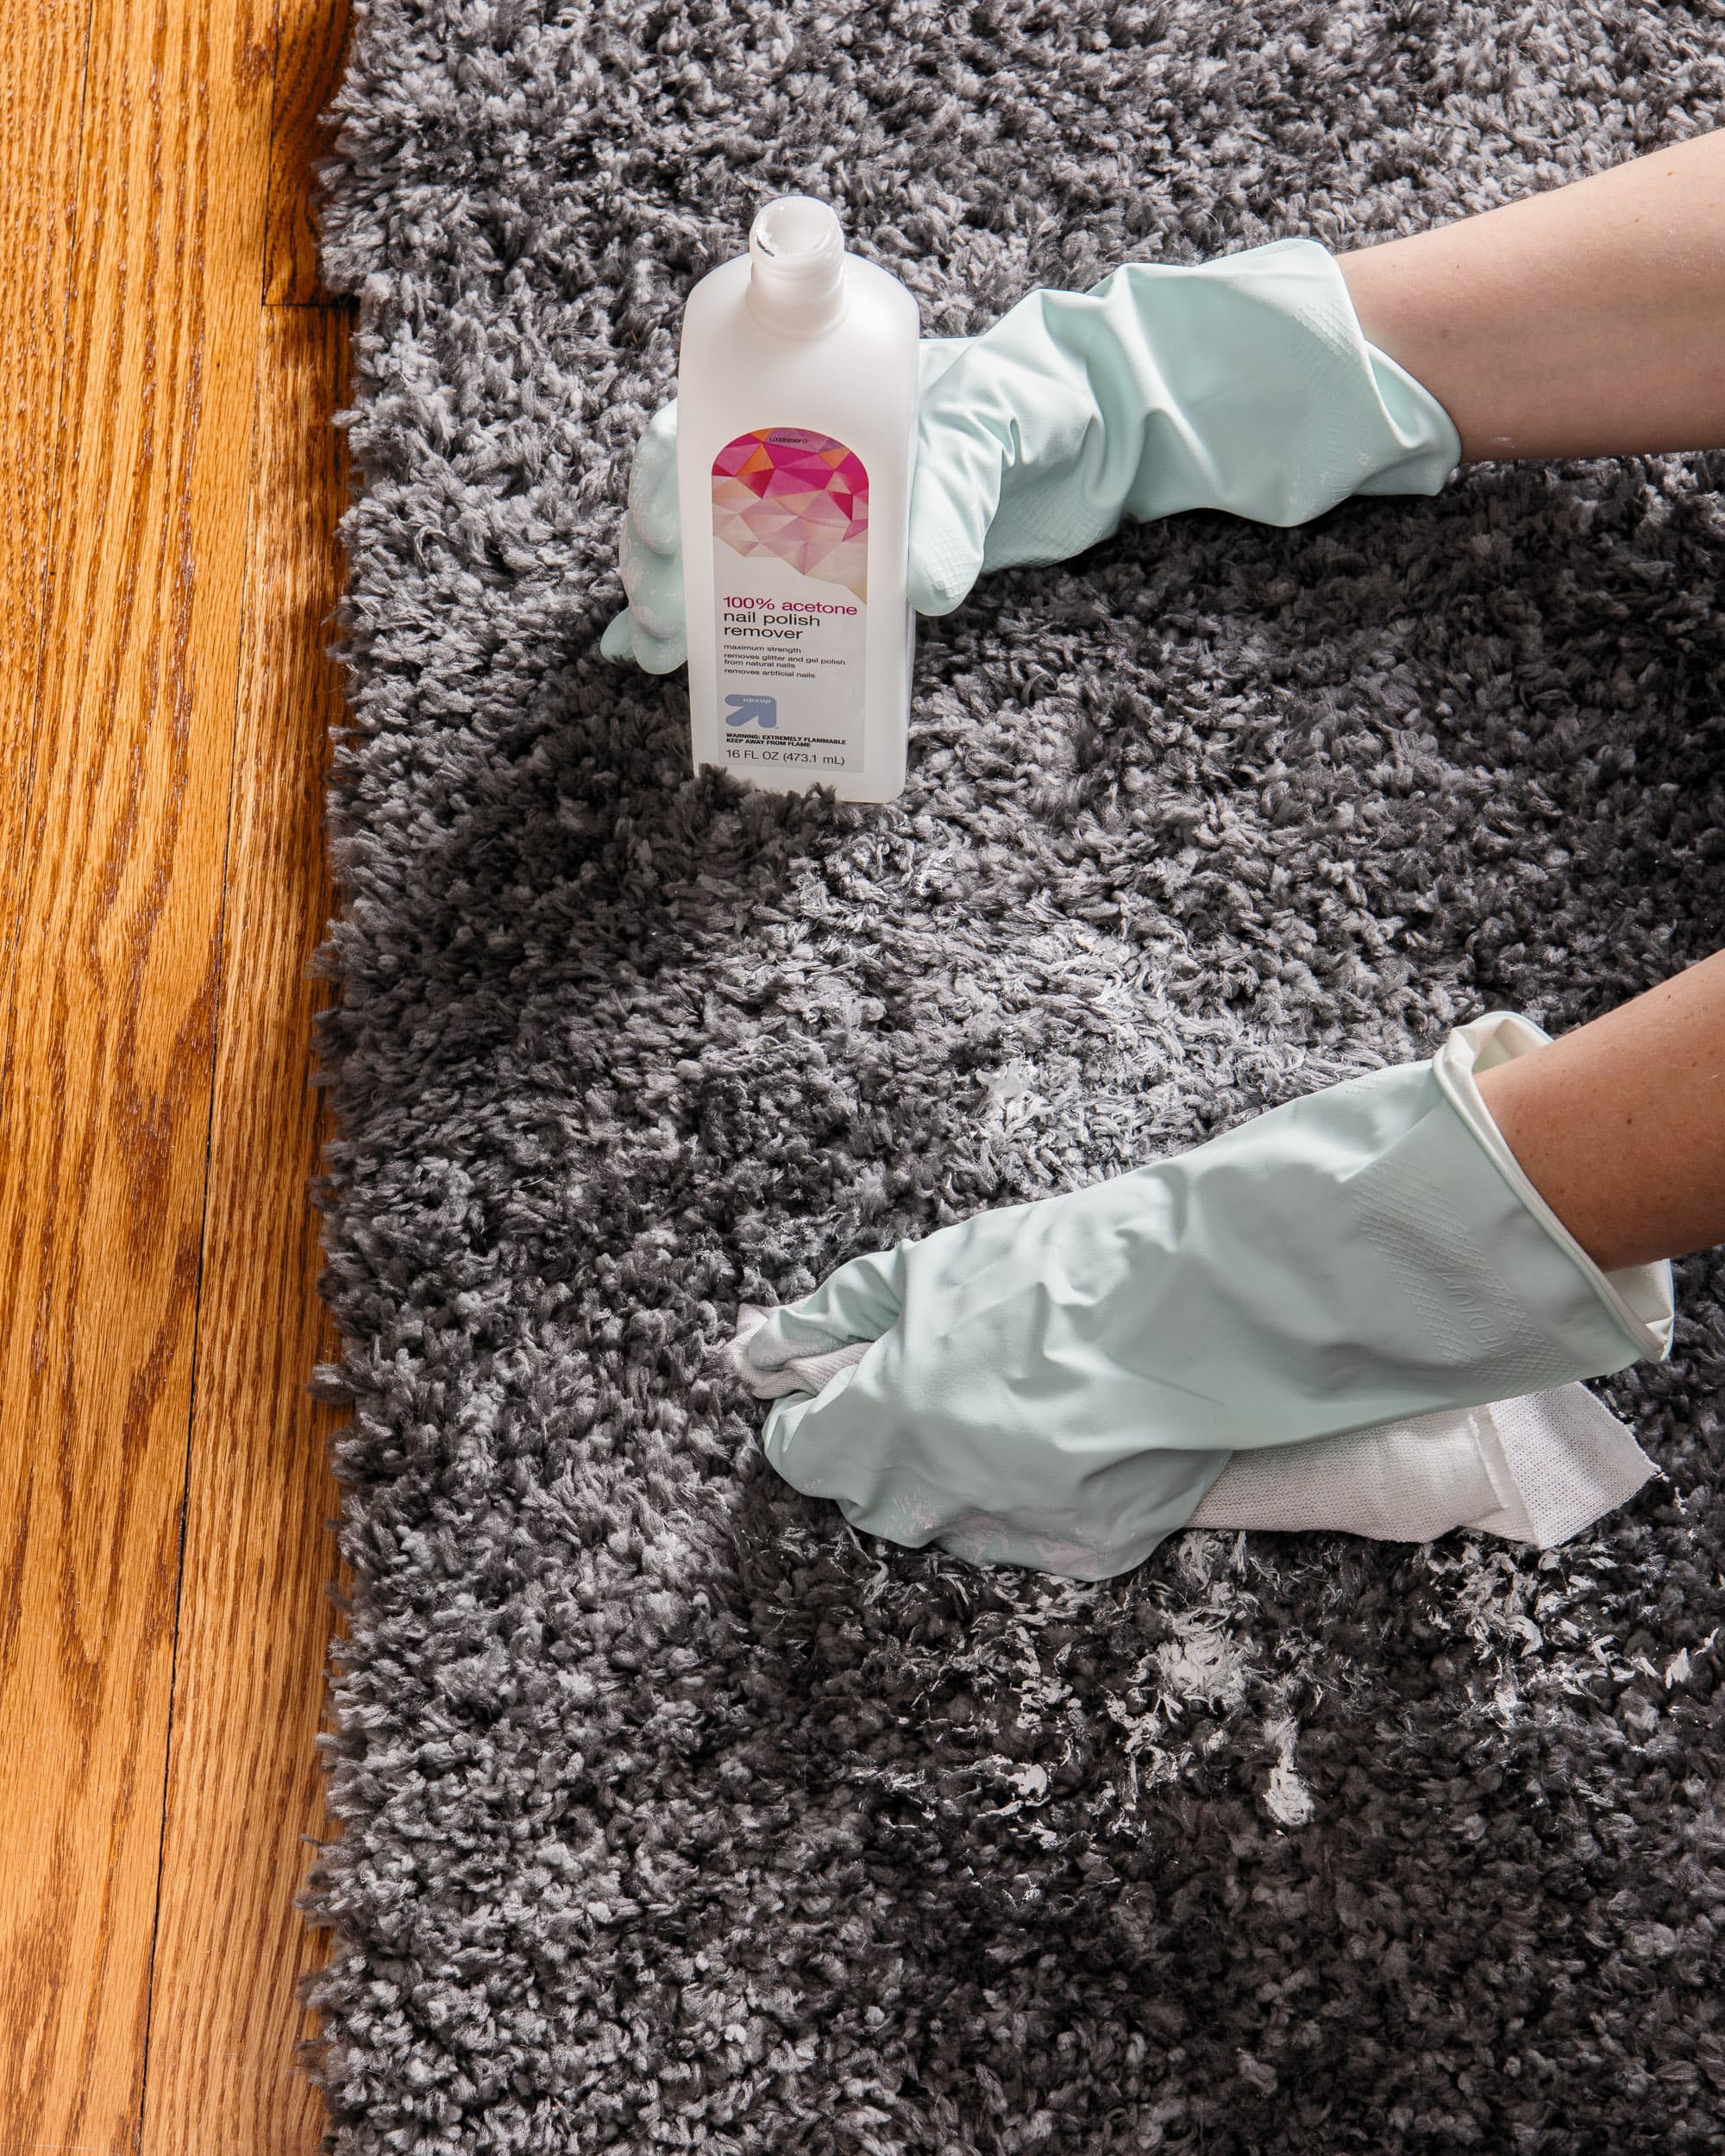 How to Get Paint Out of Carpet - 18 Ways to Remove Paint Stains